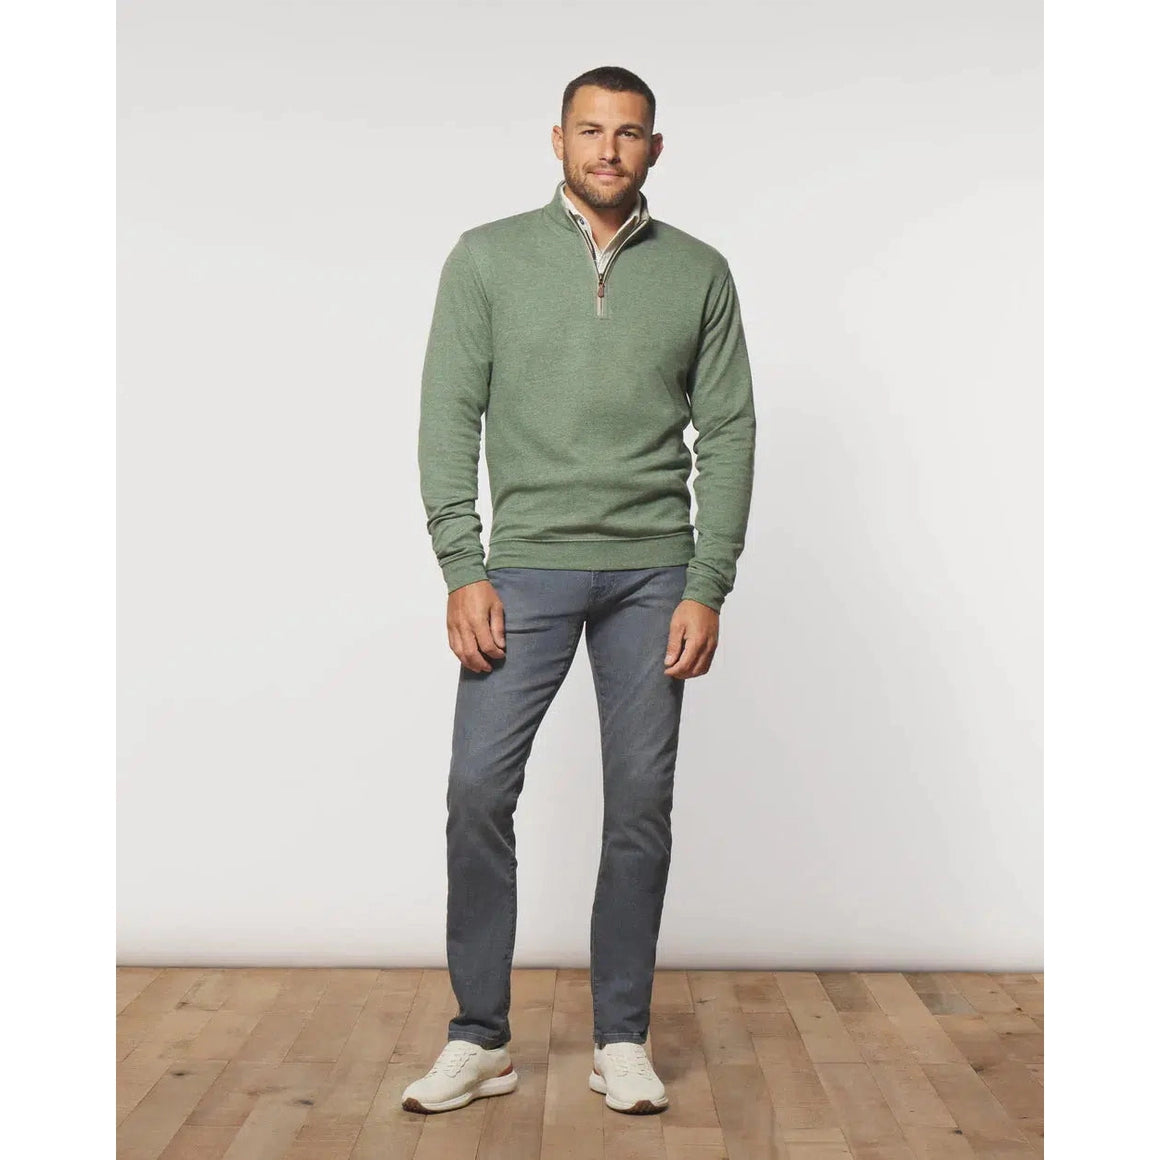 SULLY 1/4 ZIP-MENS SWEATERS & KNITS-JOHNNIE-O-JB Evans Fashions & Footwear